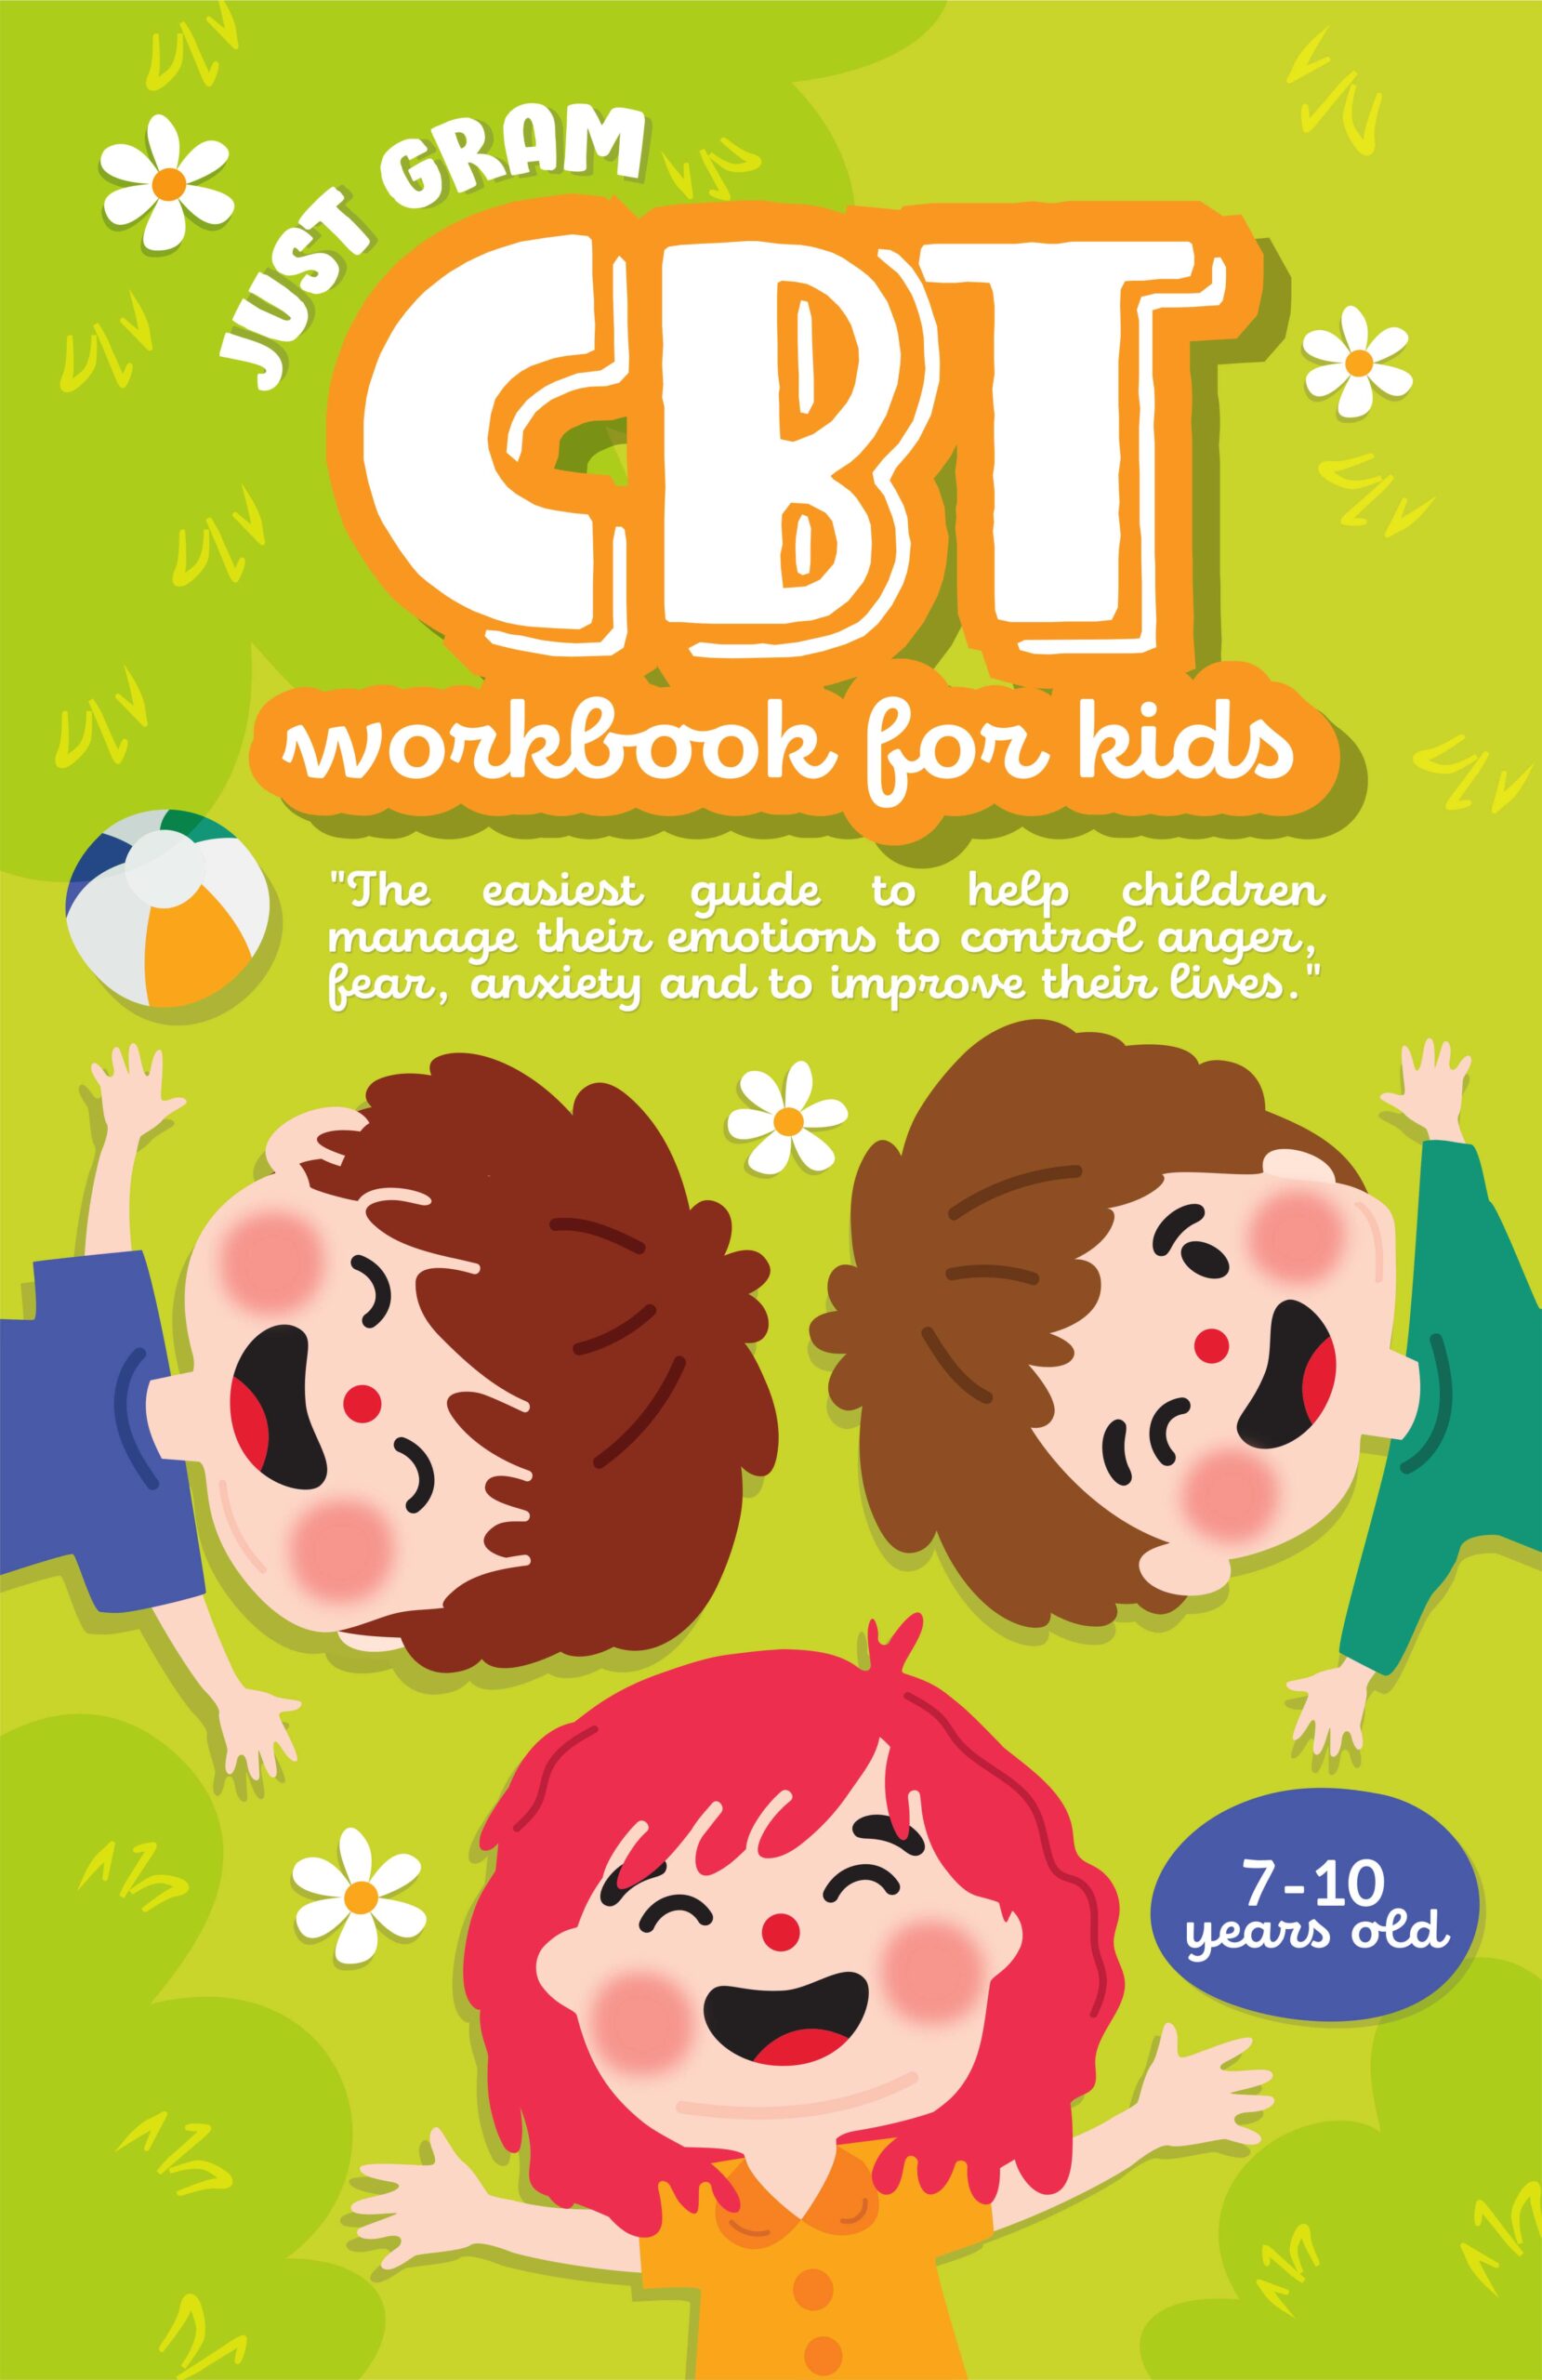 FREE: CBT WORKBOOK FOR KIDS 7-10: The easiest guide to help children manage their emotions to control anger, fear, anxiety and to improve their lives! by Just Gram